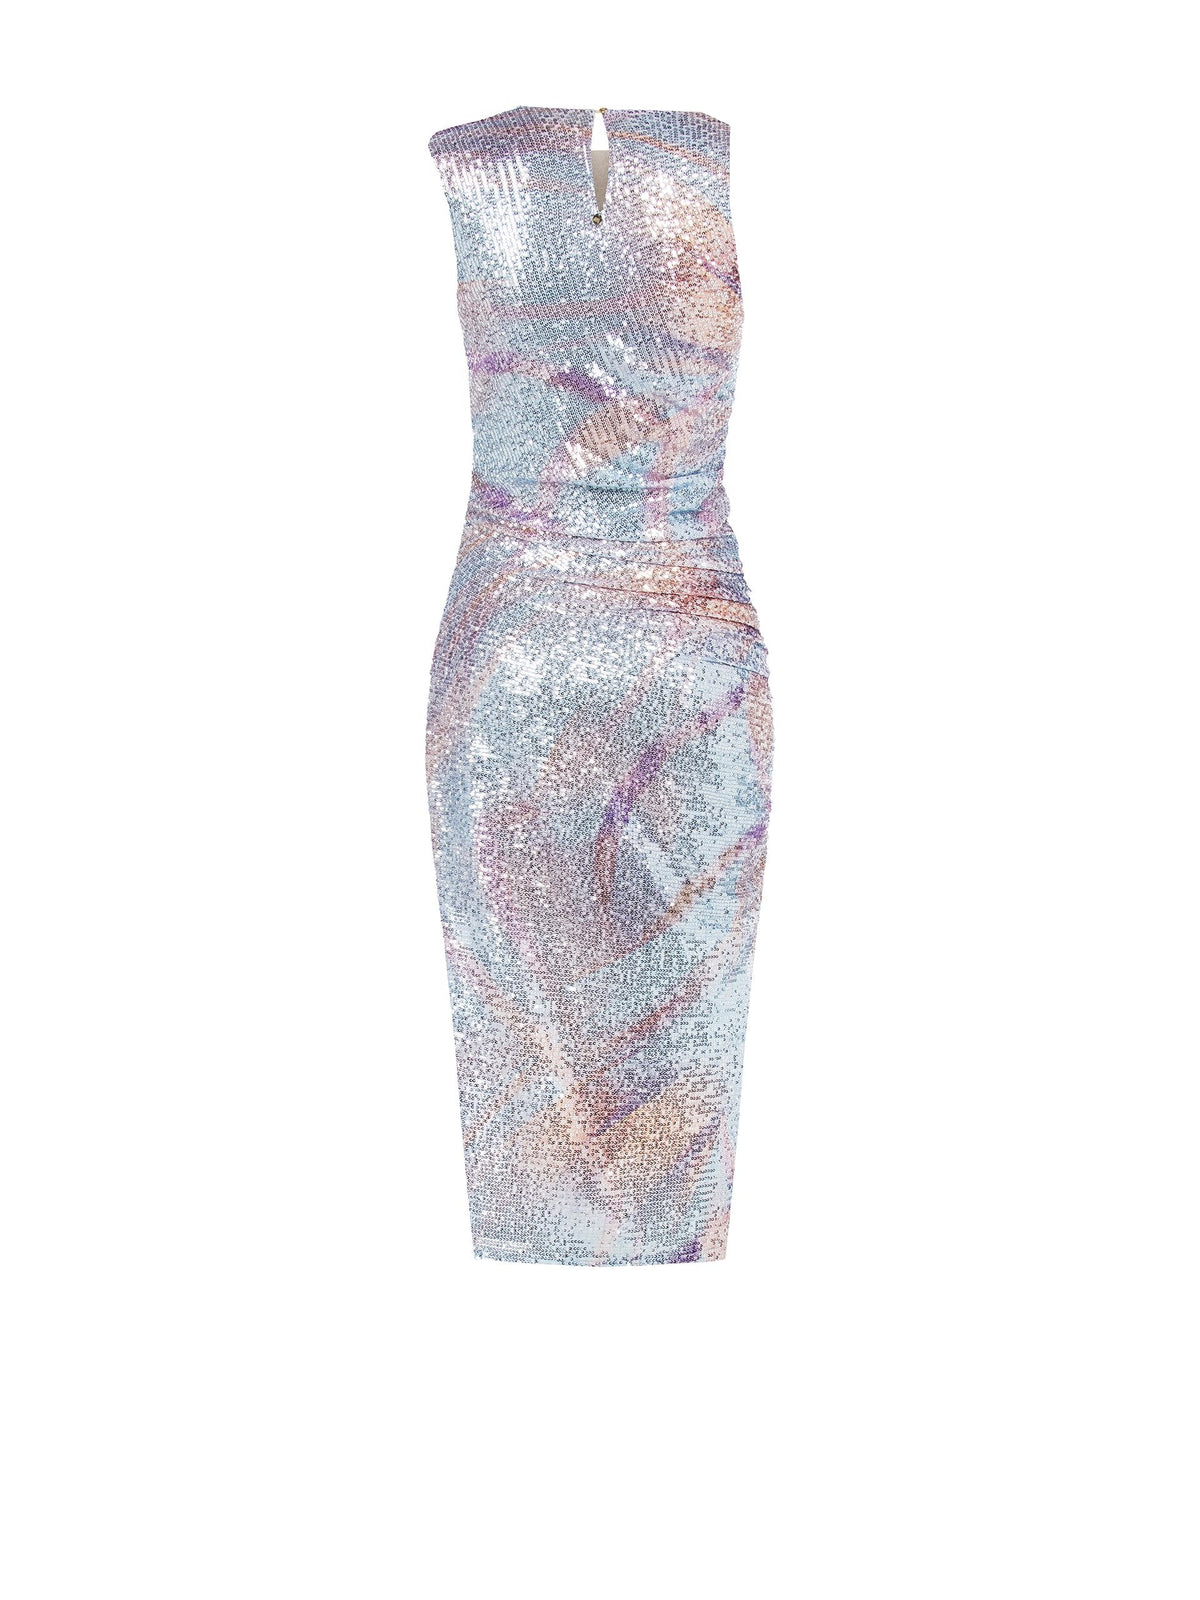 Gathered Sequin Sheath Dress with Side Slit